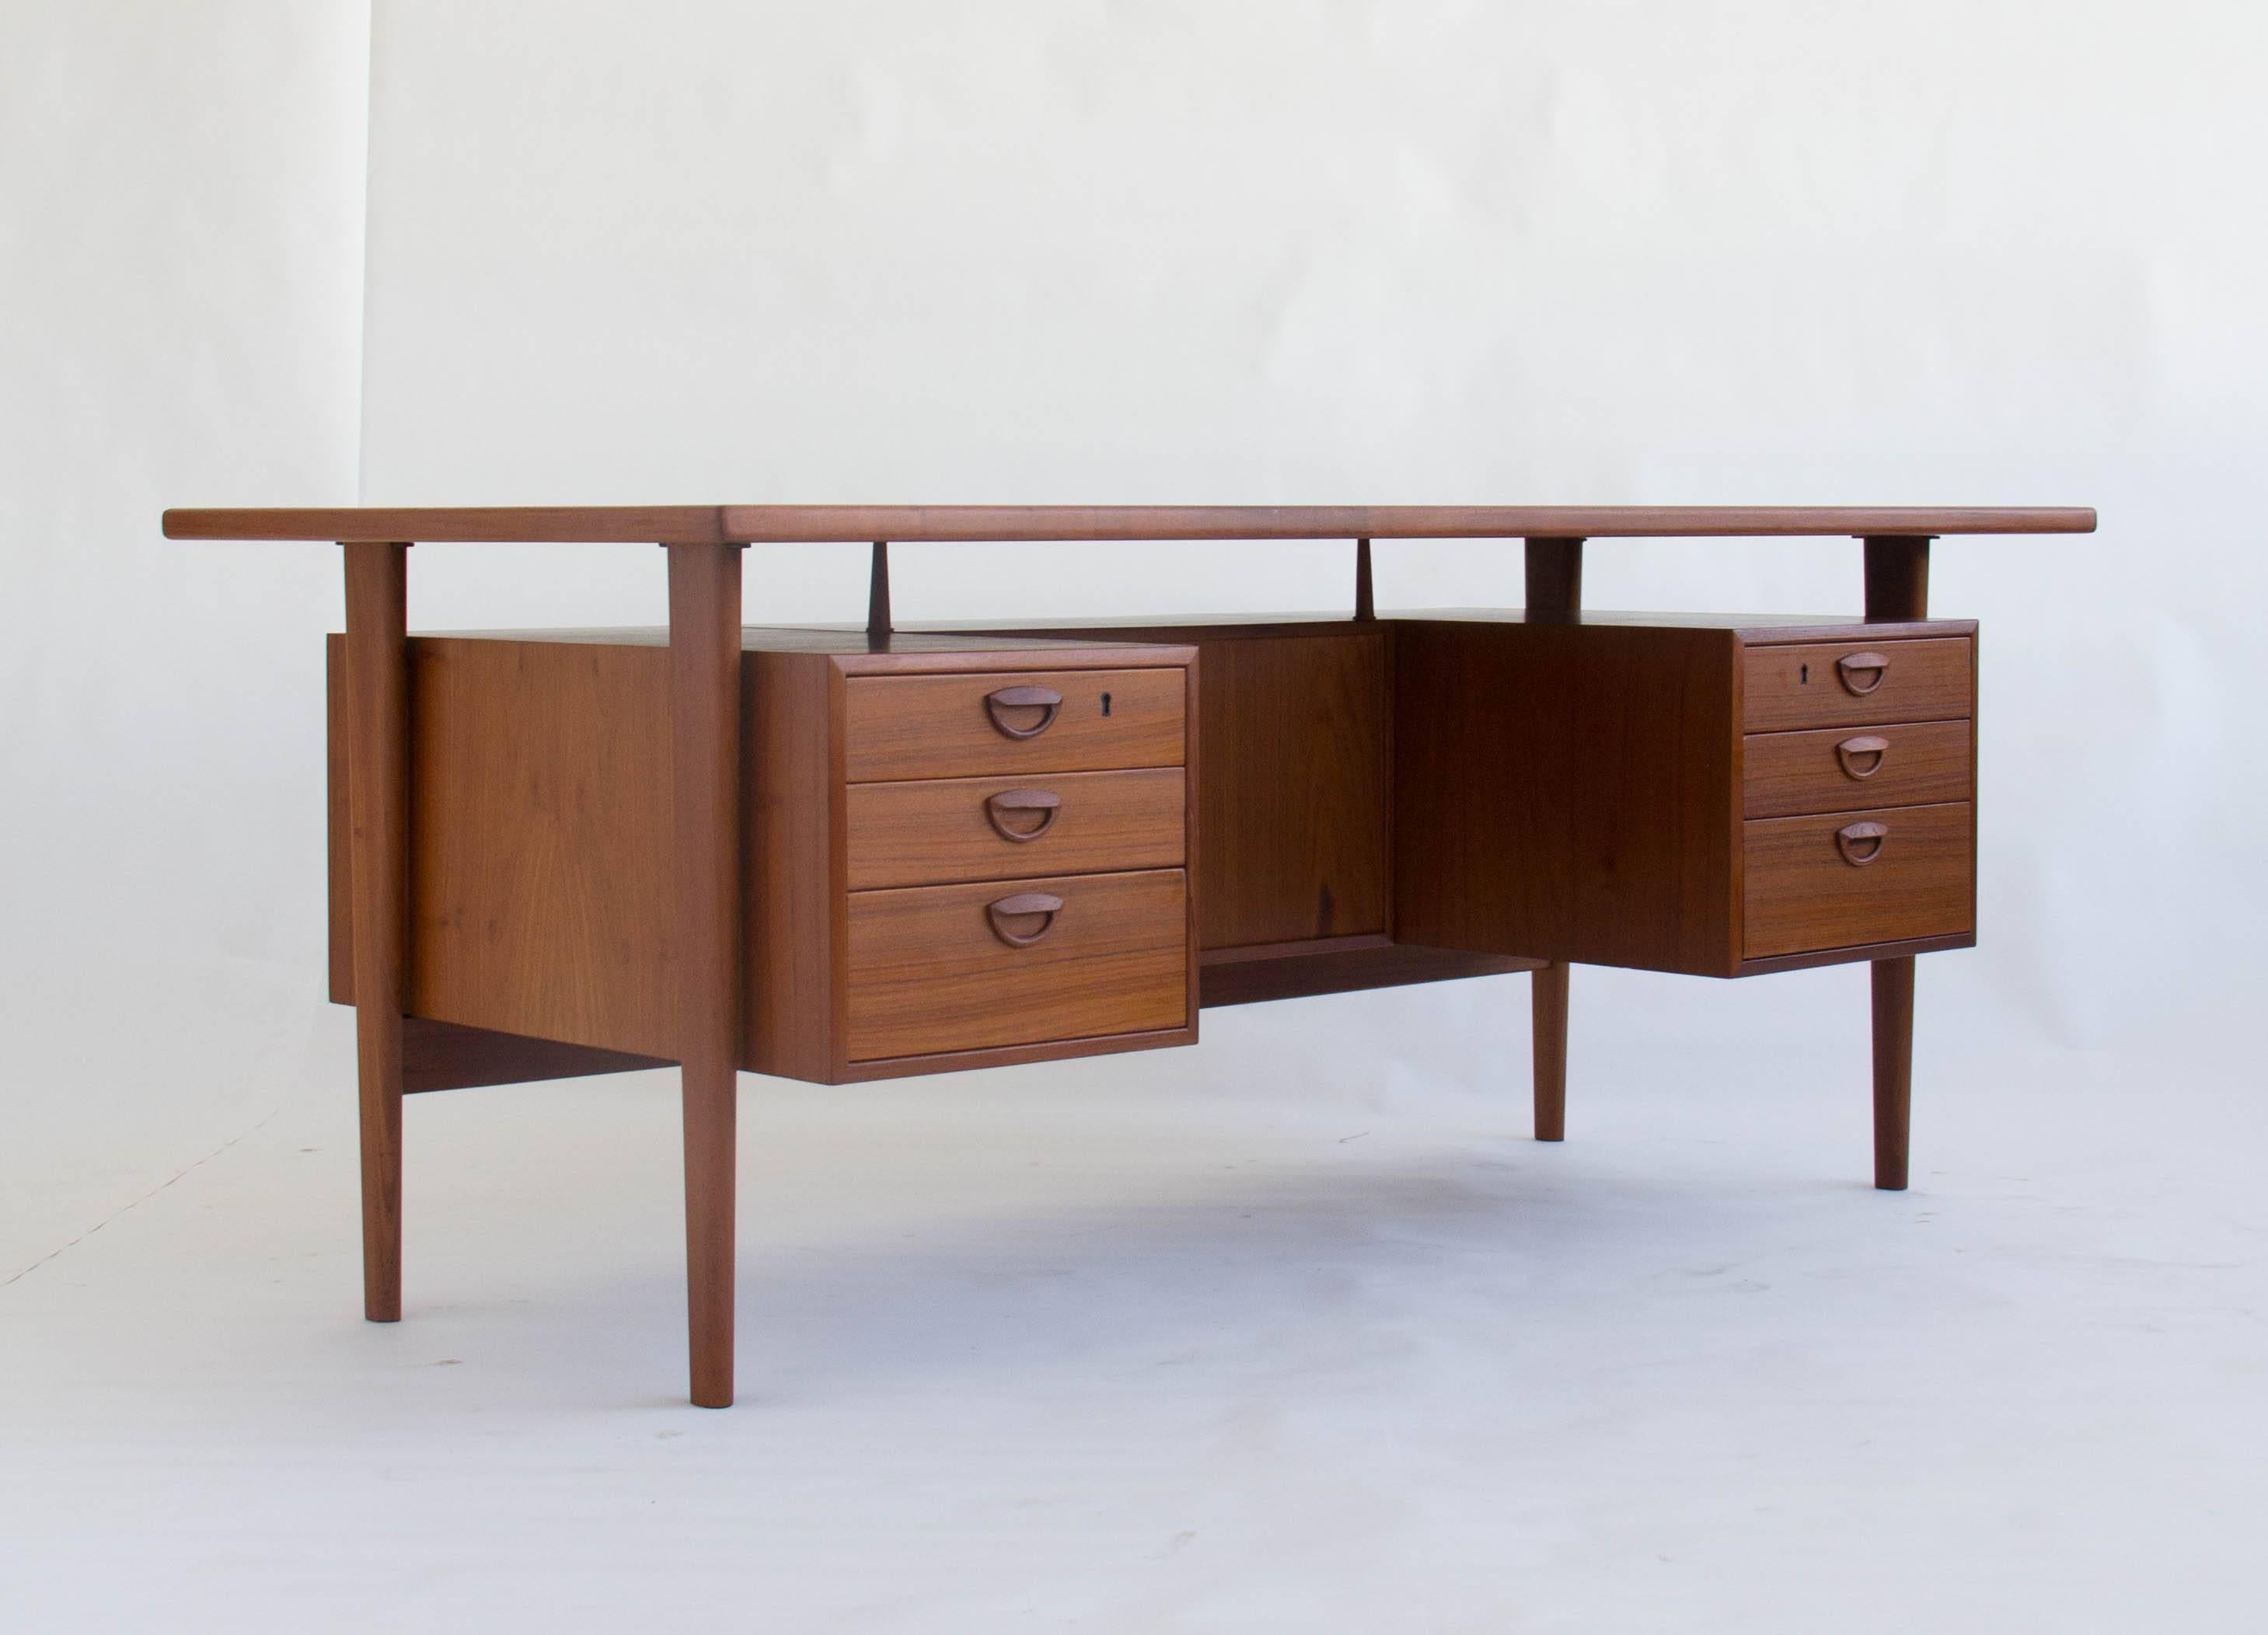 This striking floating teak desk by Kai Kristiansen features six drawers on the front side with handsome inset teak handles. On the back side of this desk there is one open section and two cabinet doors that contain storage compartments.